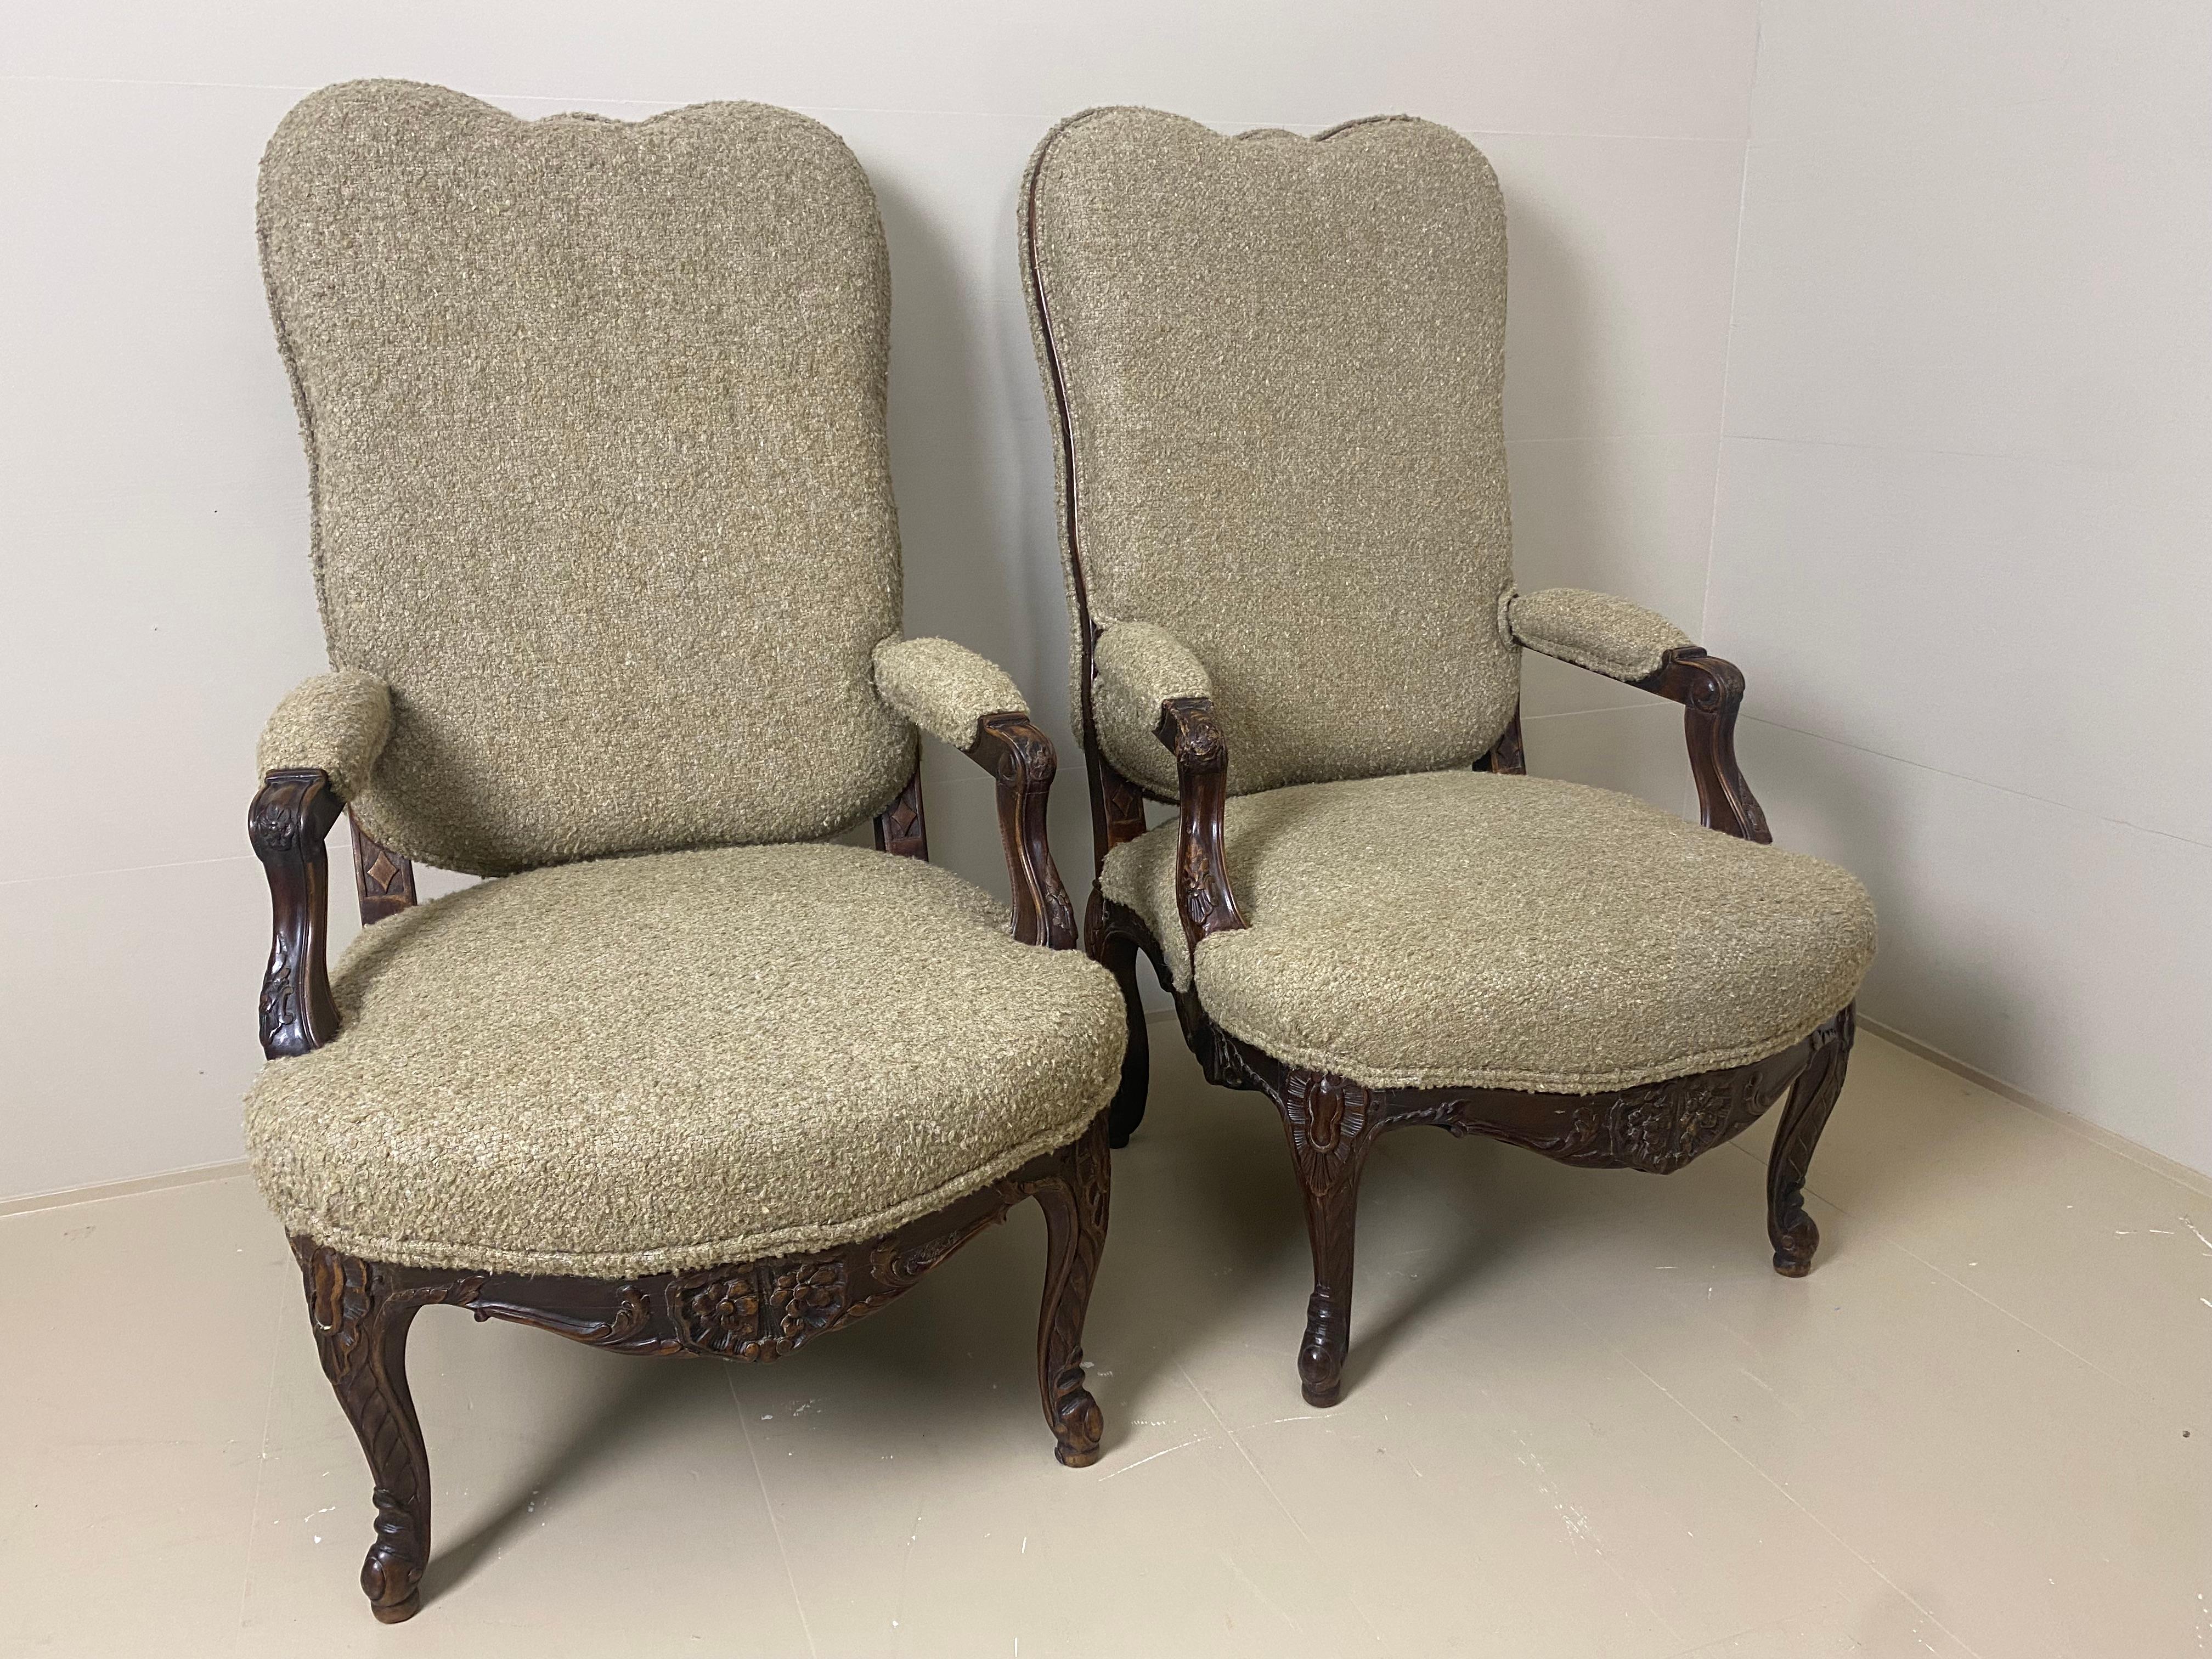 Elegant pair of armchairs from Barcelona, Spain,
made in a rustic, dark fruitwood,
elegant round back of the chair,
fully restored and newly upholstered with a green-beige wool-cotton fabric
very comfortable seating, nice to make the combination